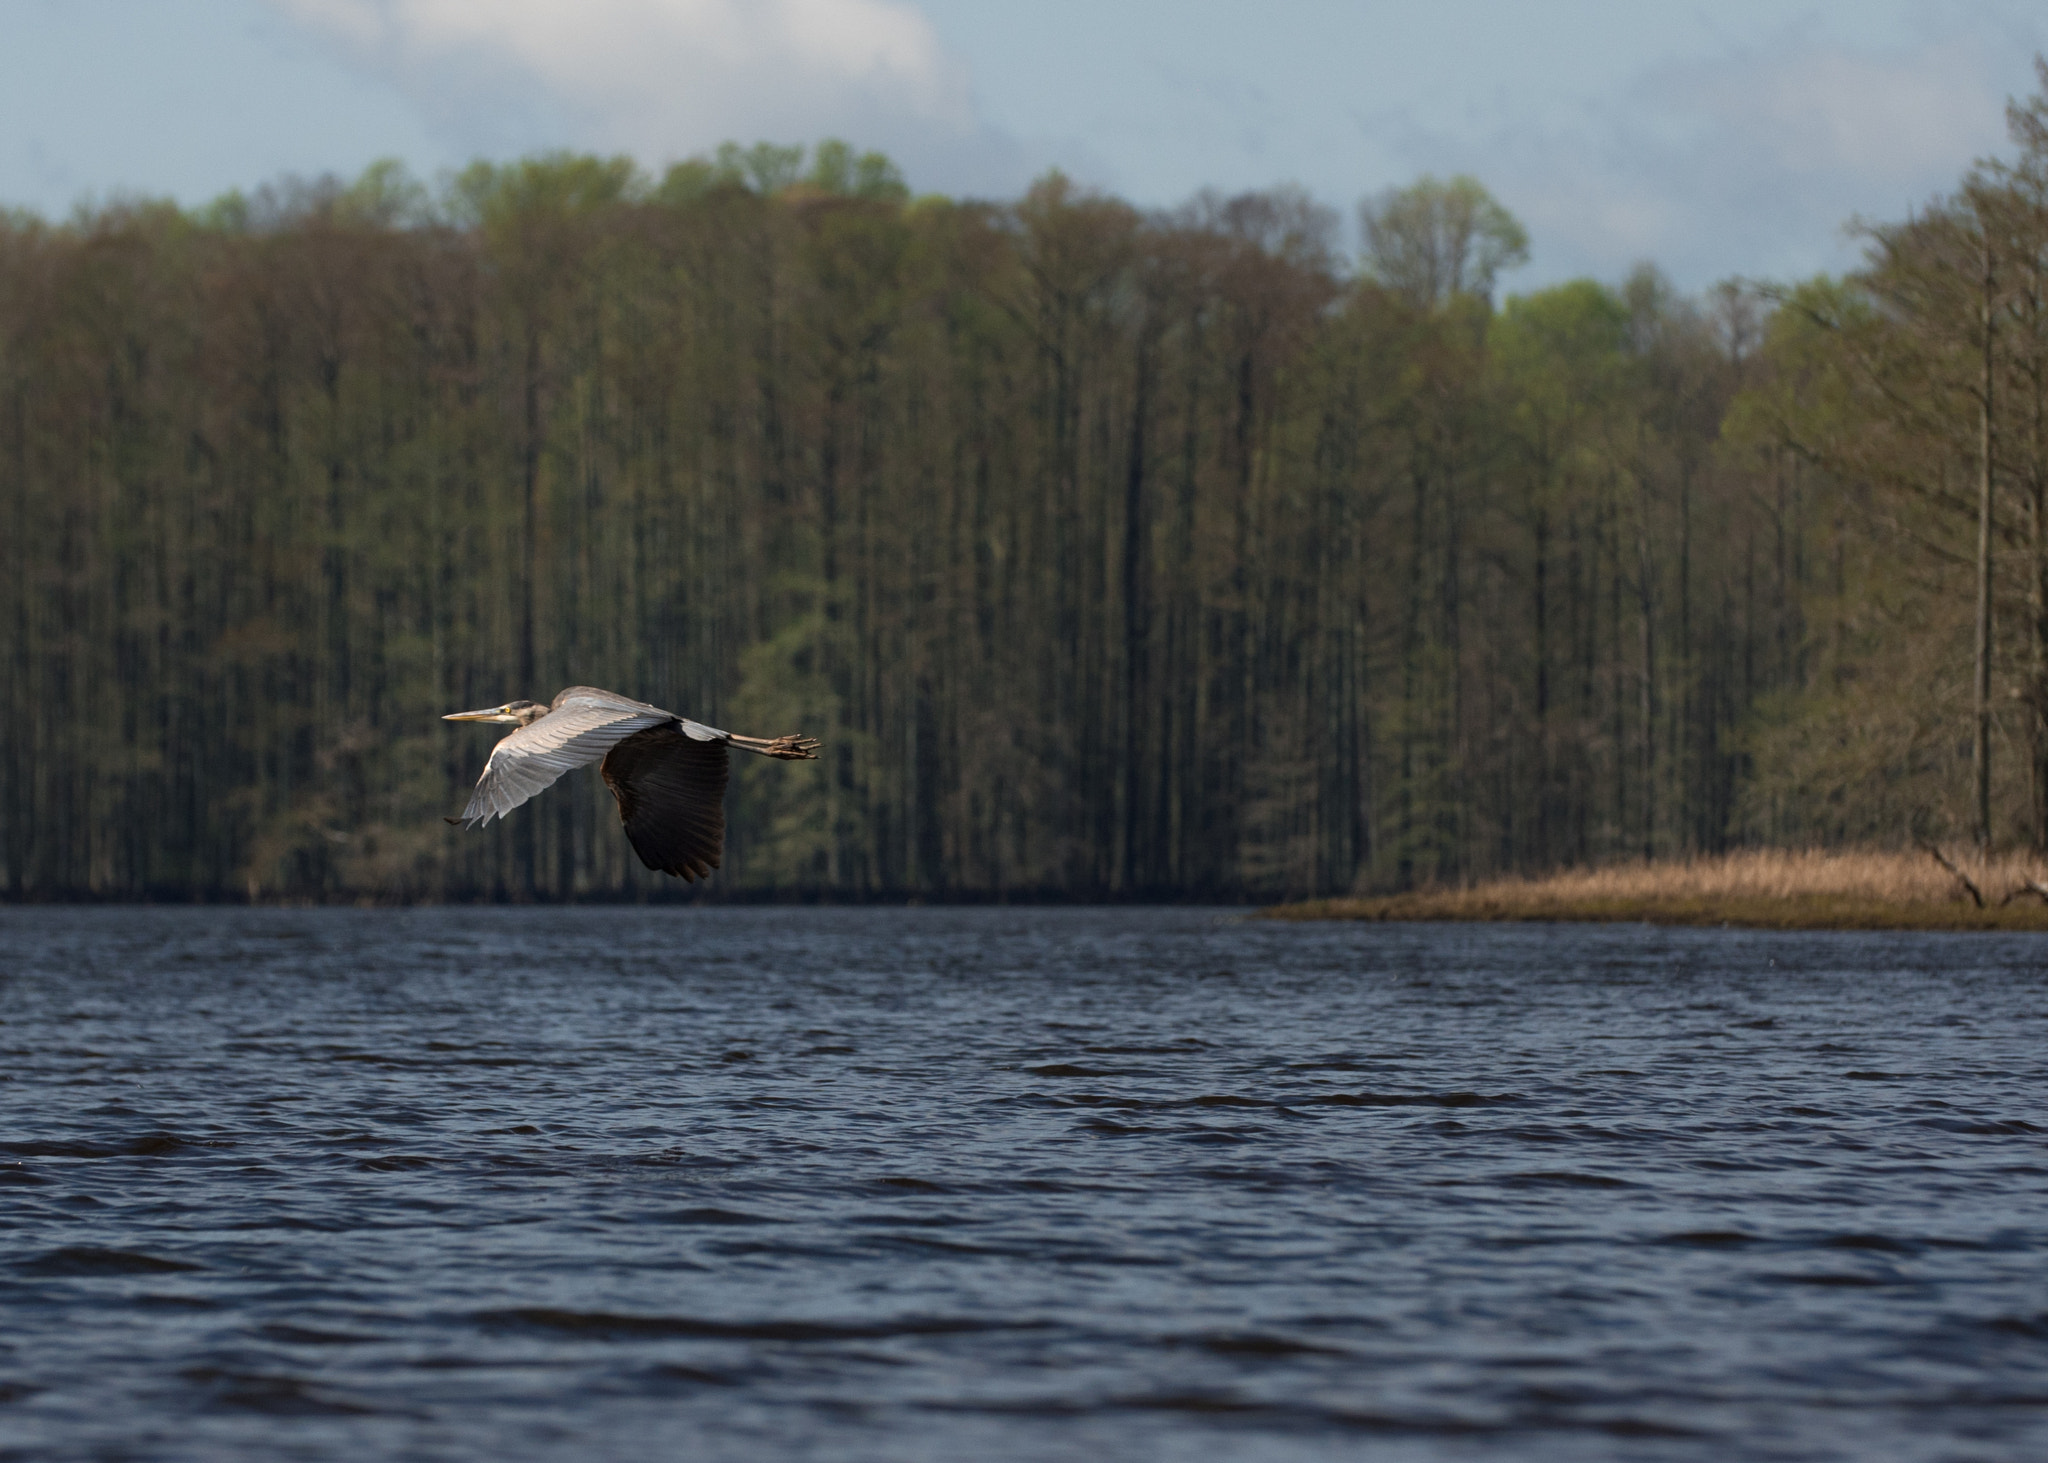 Panasonic Lumix DMC-GH4 + Canon EF 70-200mm F2.8L IS II USM sample photo. Heron in flight over open water photography